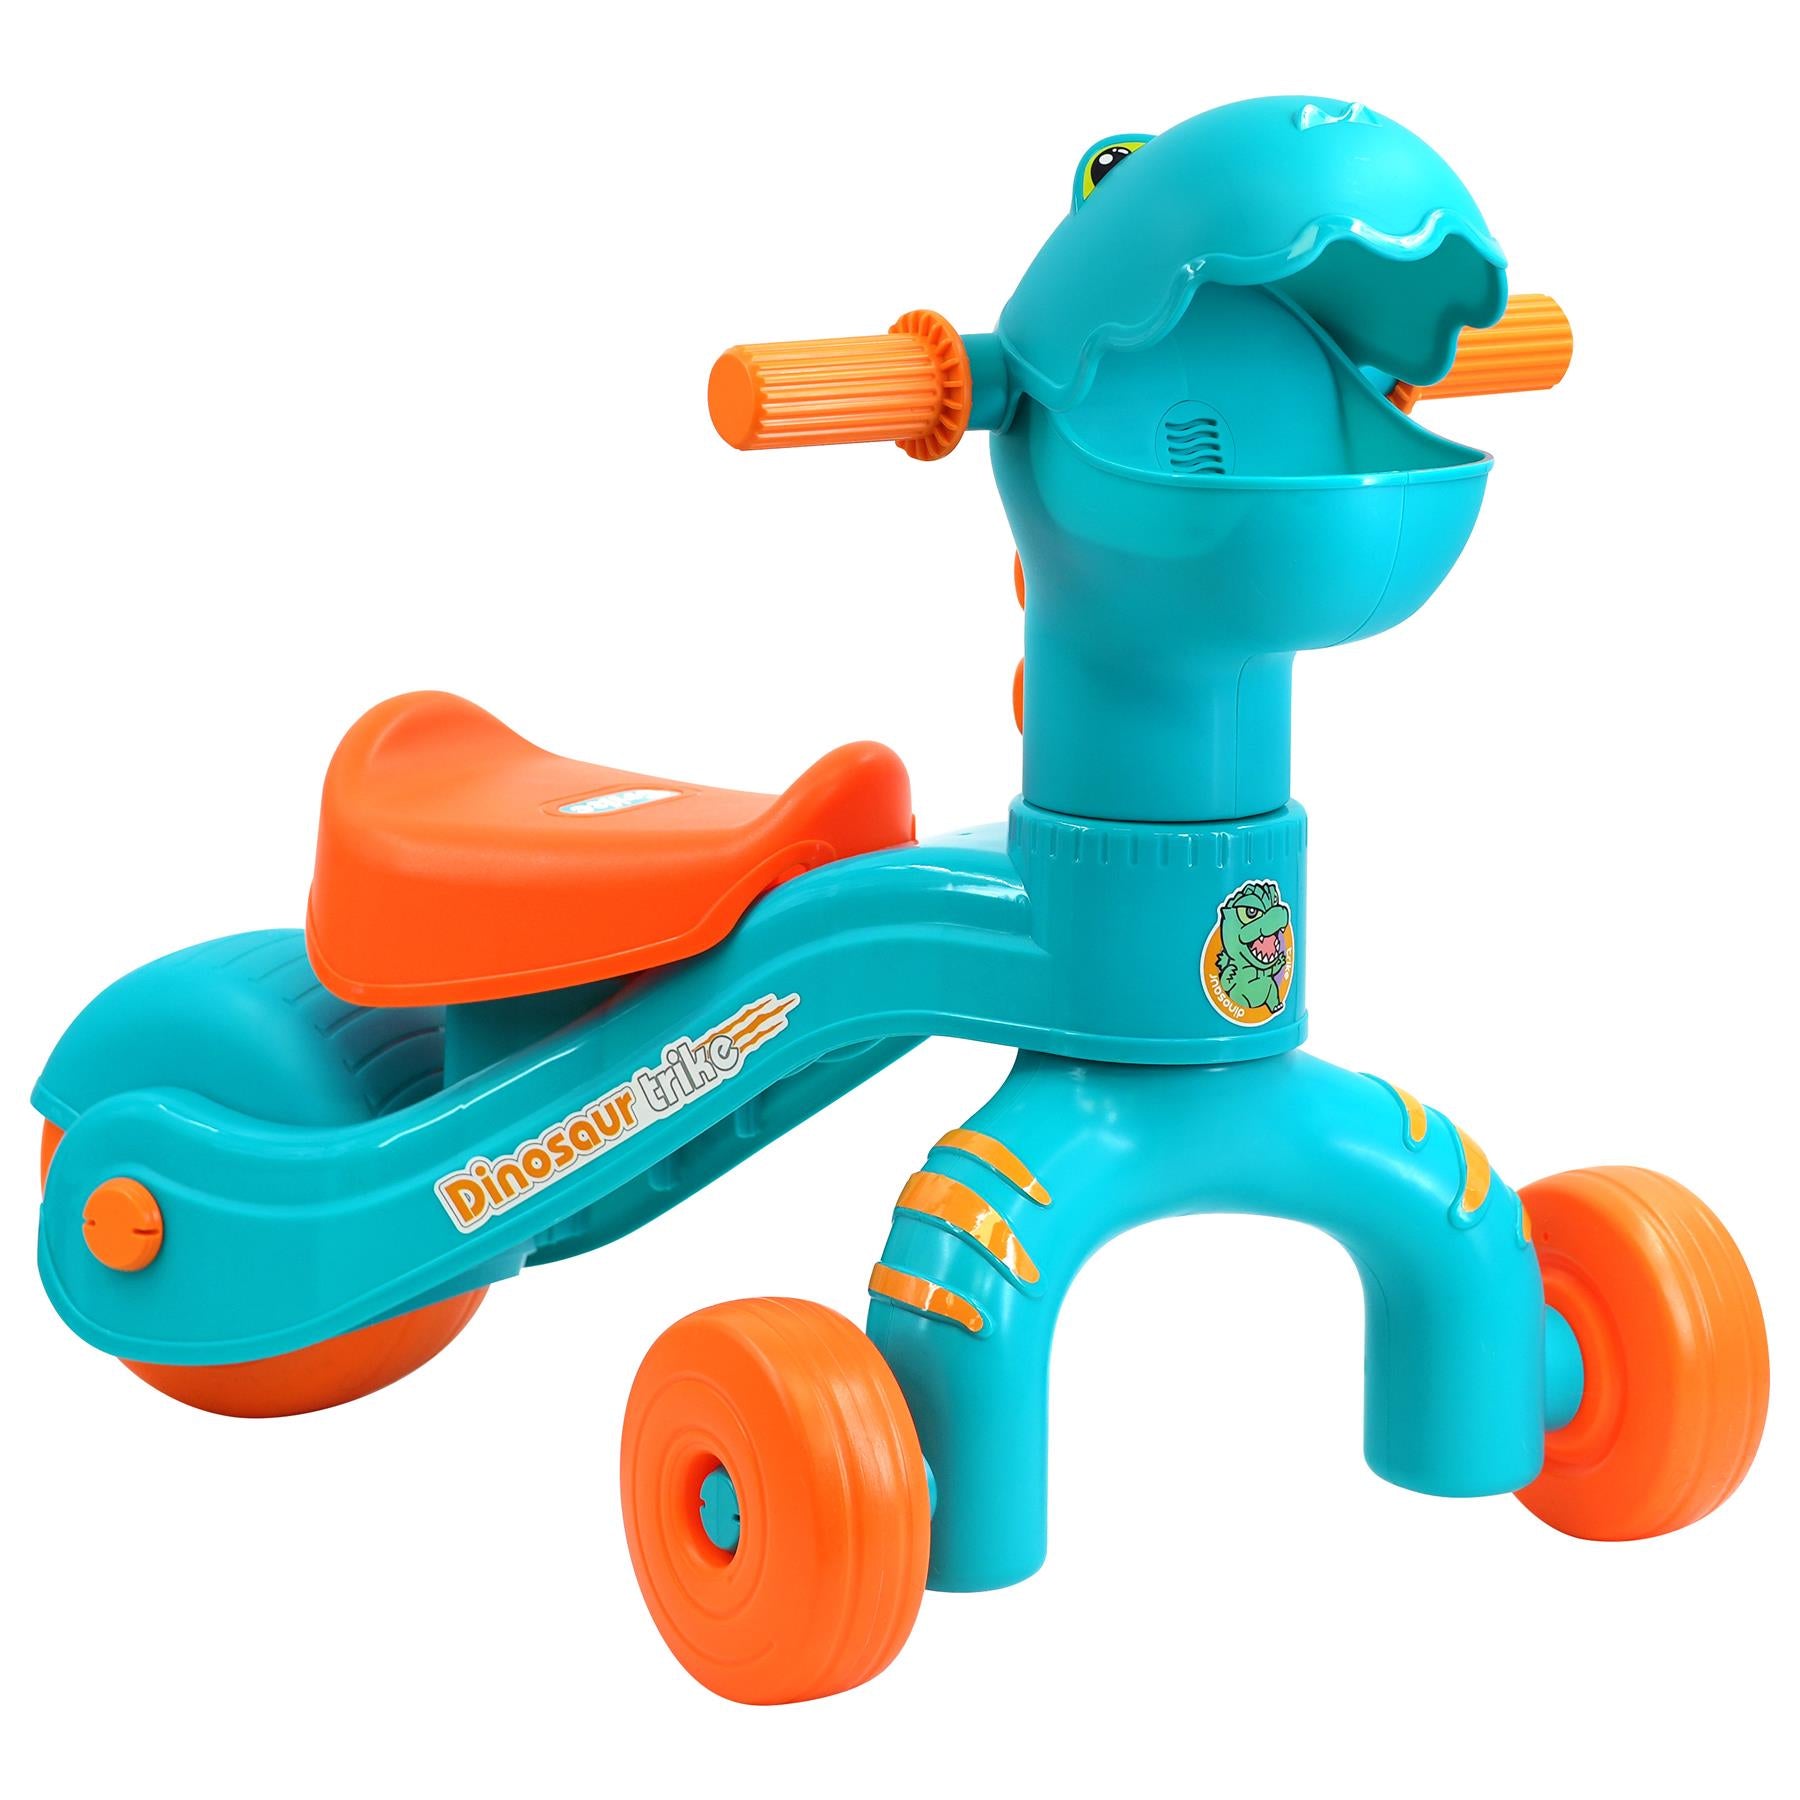 Dino Trike Interactive Ride On by The Magic Toy Shop - The Magic Toy Shop